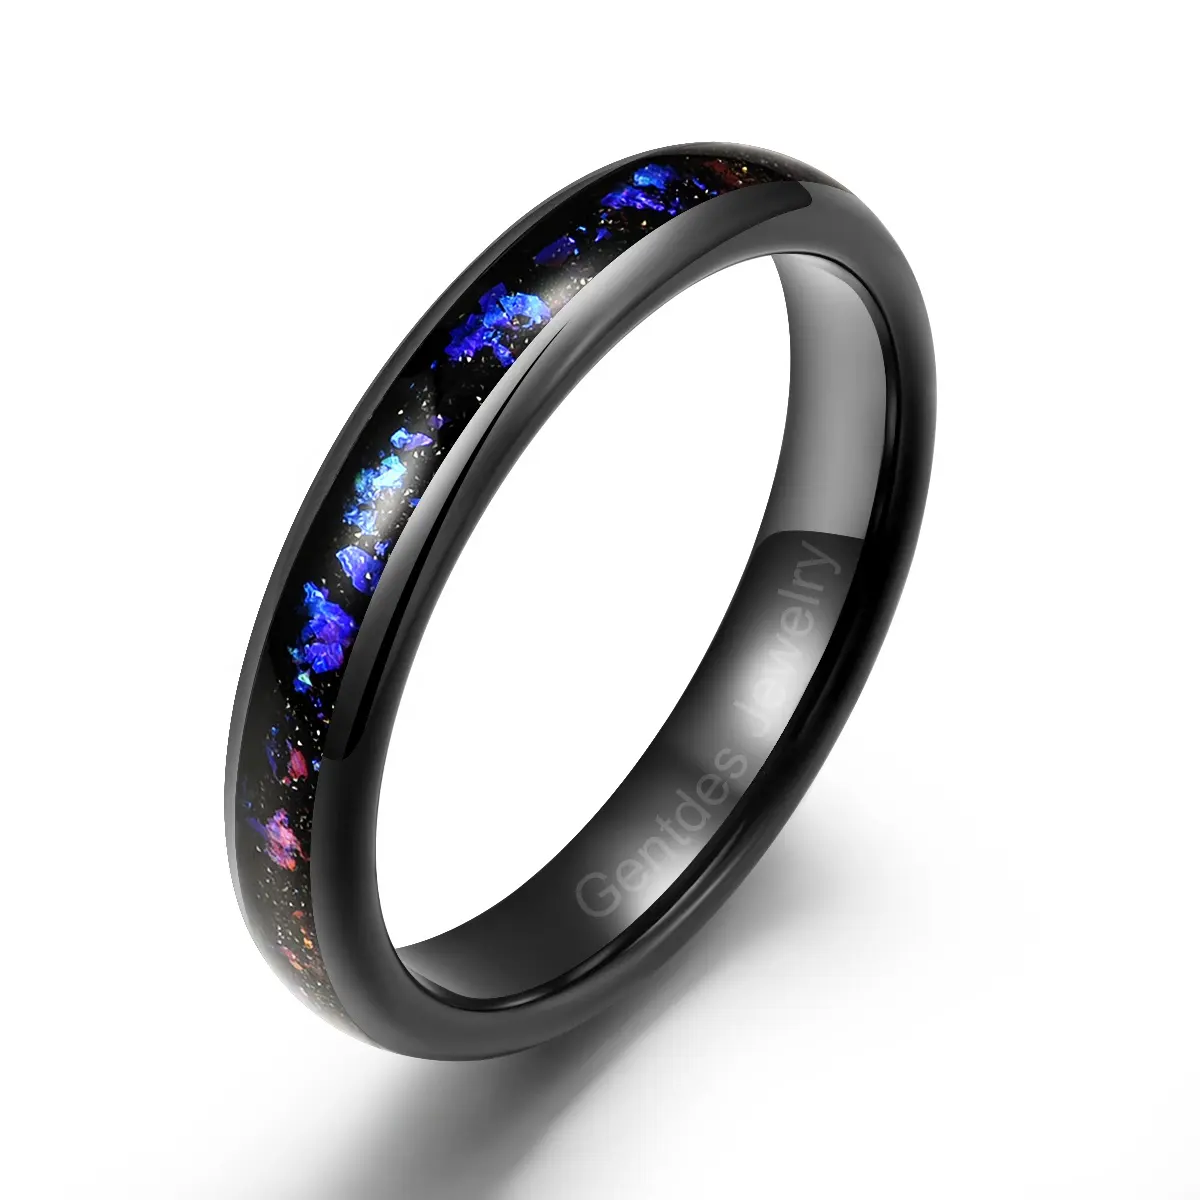 Gentdes Jewelry 4mm Cool Rings Colorful Stone Wedding Rings Women Wedding Bands Black Tungsten Beauty Finger Ring